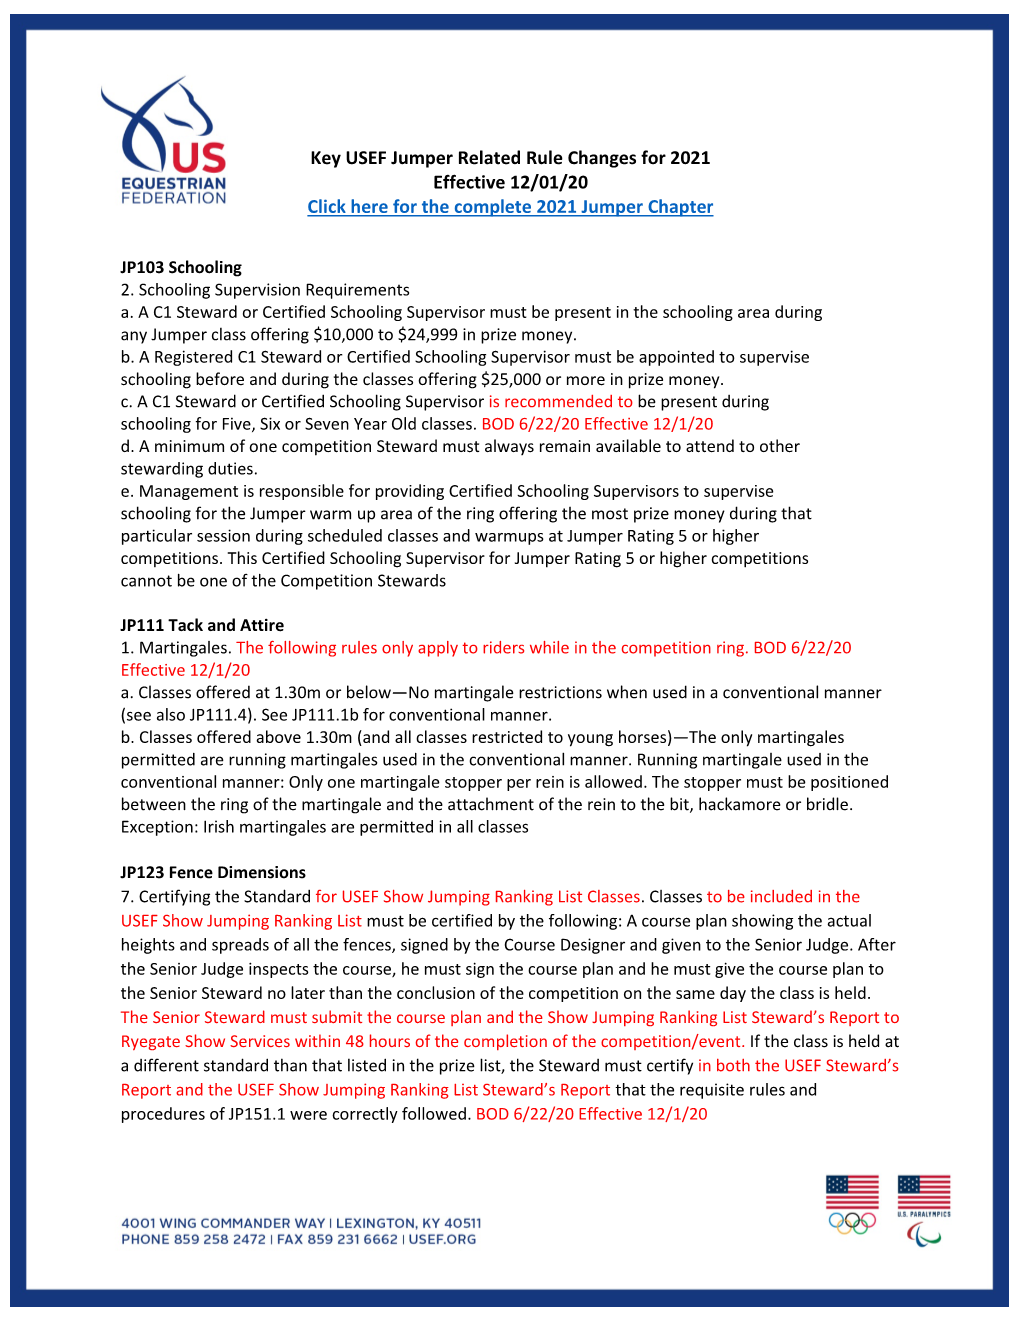 Key USEF Jumper Related Rule Changes for 2021 Effective 12/01/20 Click Here for the Complete 2021 Jumper Chapter